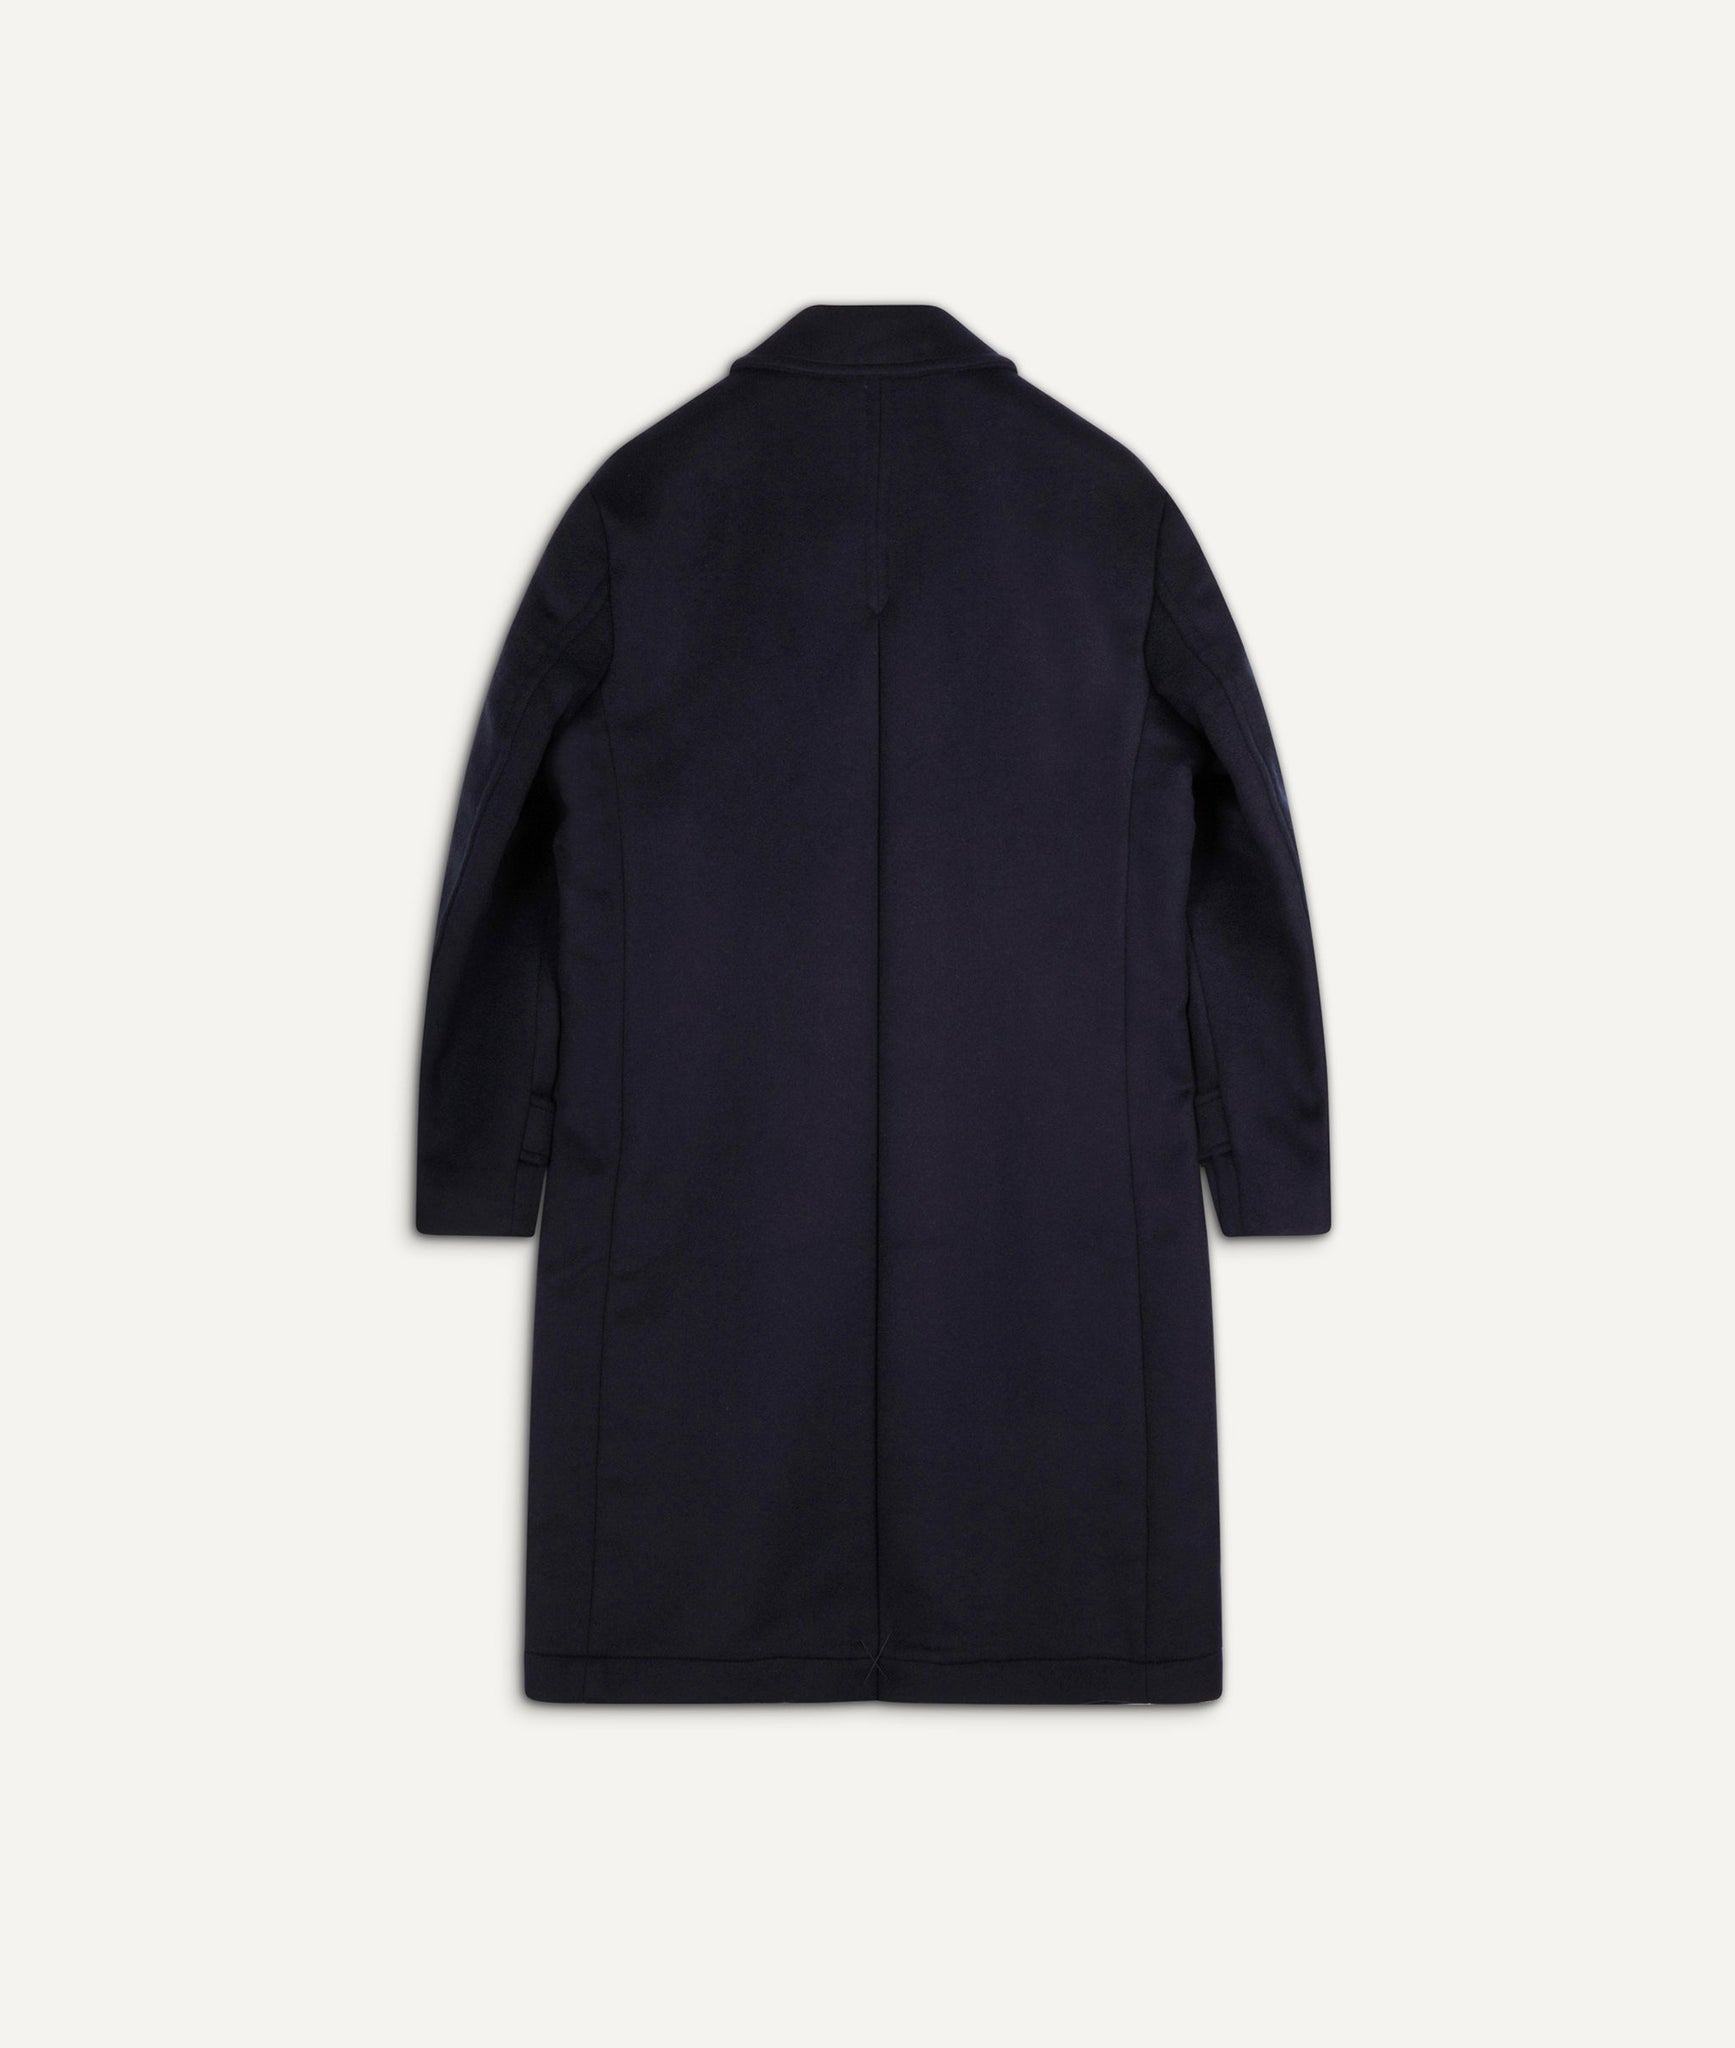 Eleventy - Coat in Cashmere